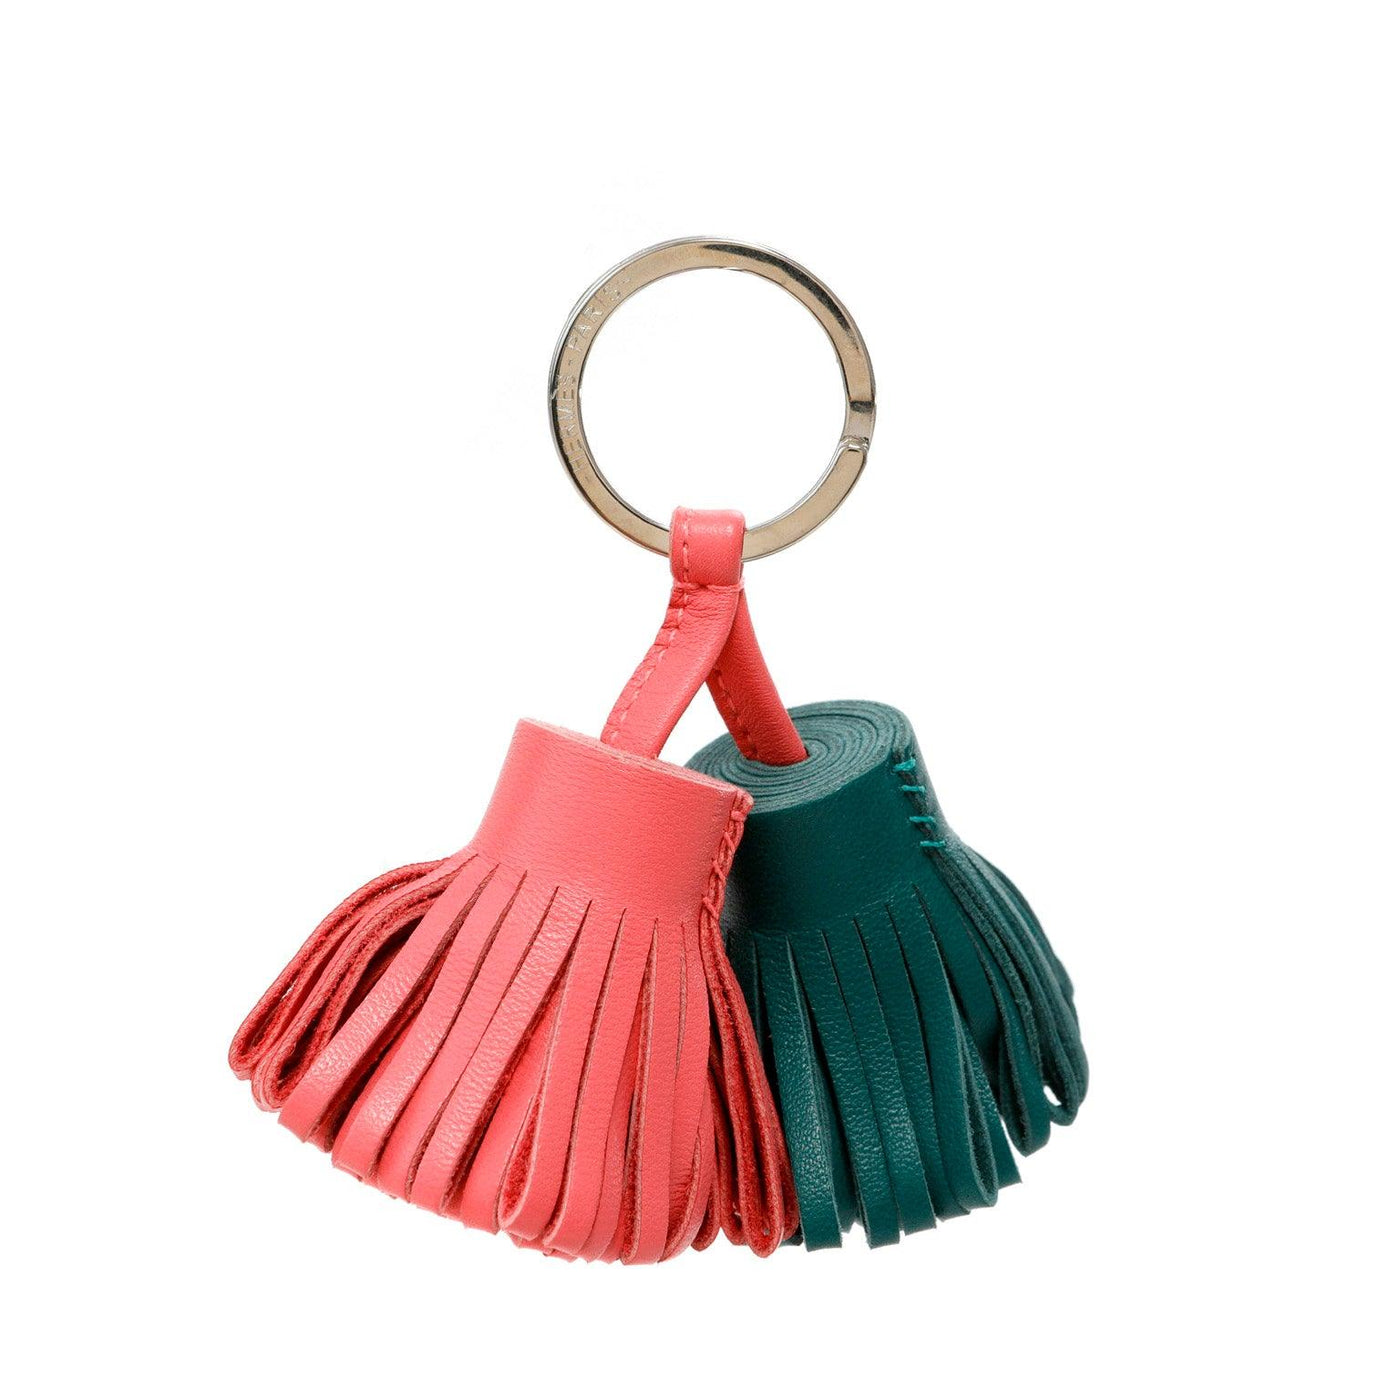 Hermes Green & Pink Double Car Wash Key Chain - Only Authentics